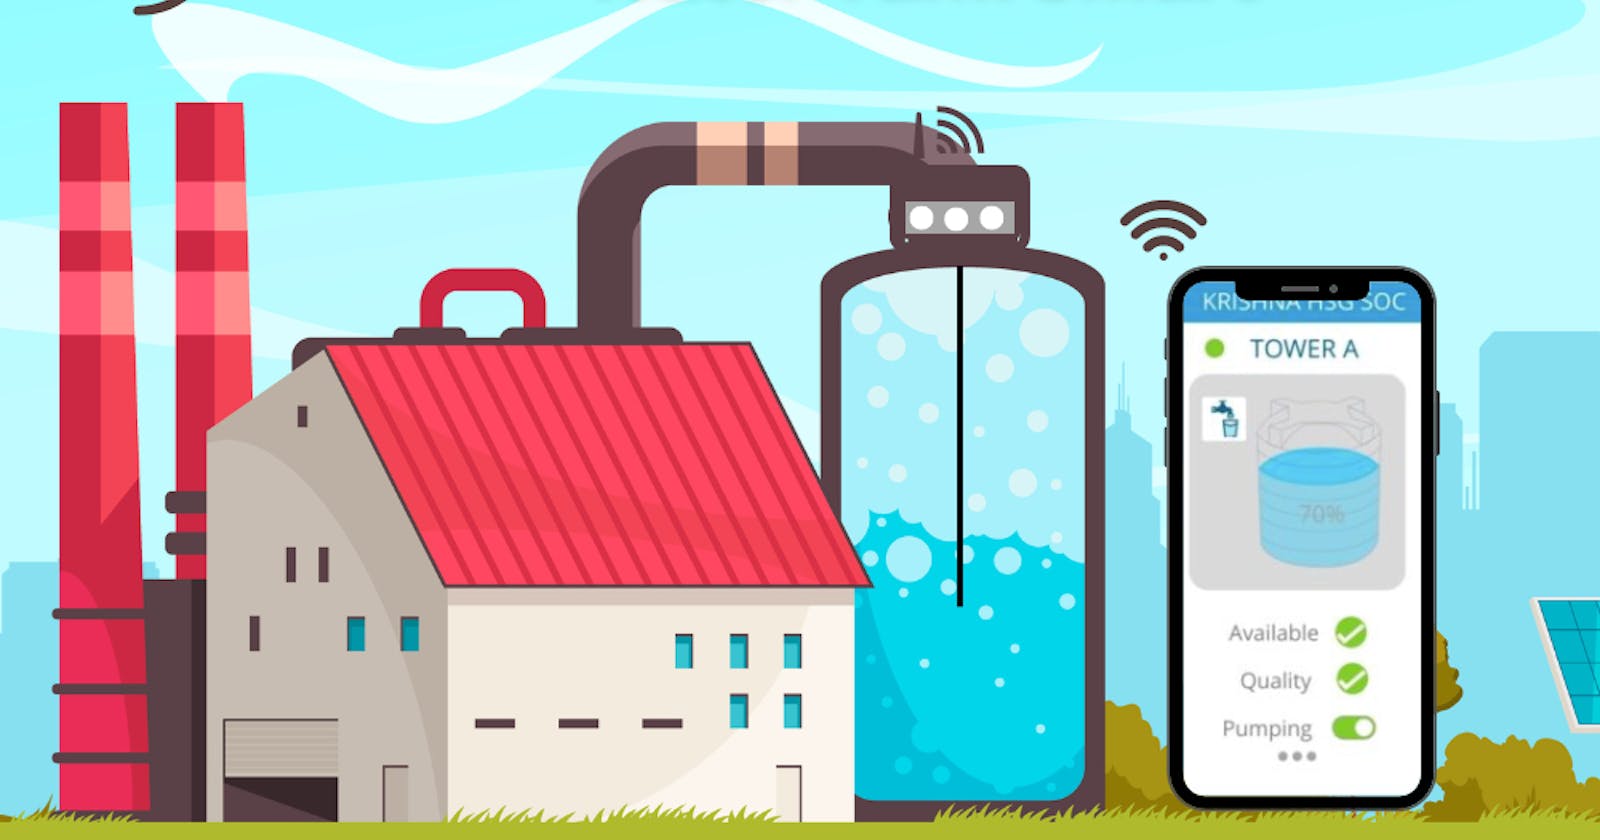 Install IoT Sensors To Make Your Water Tank Smart